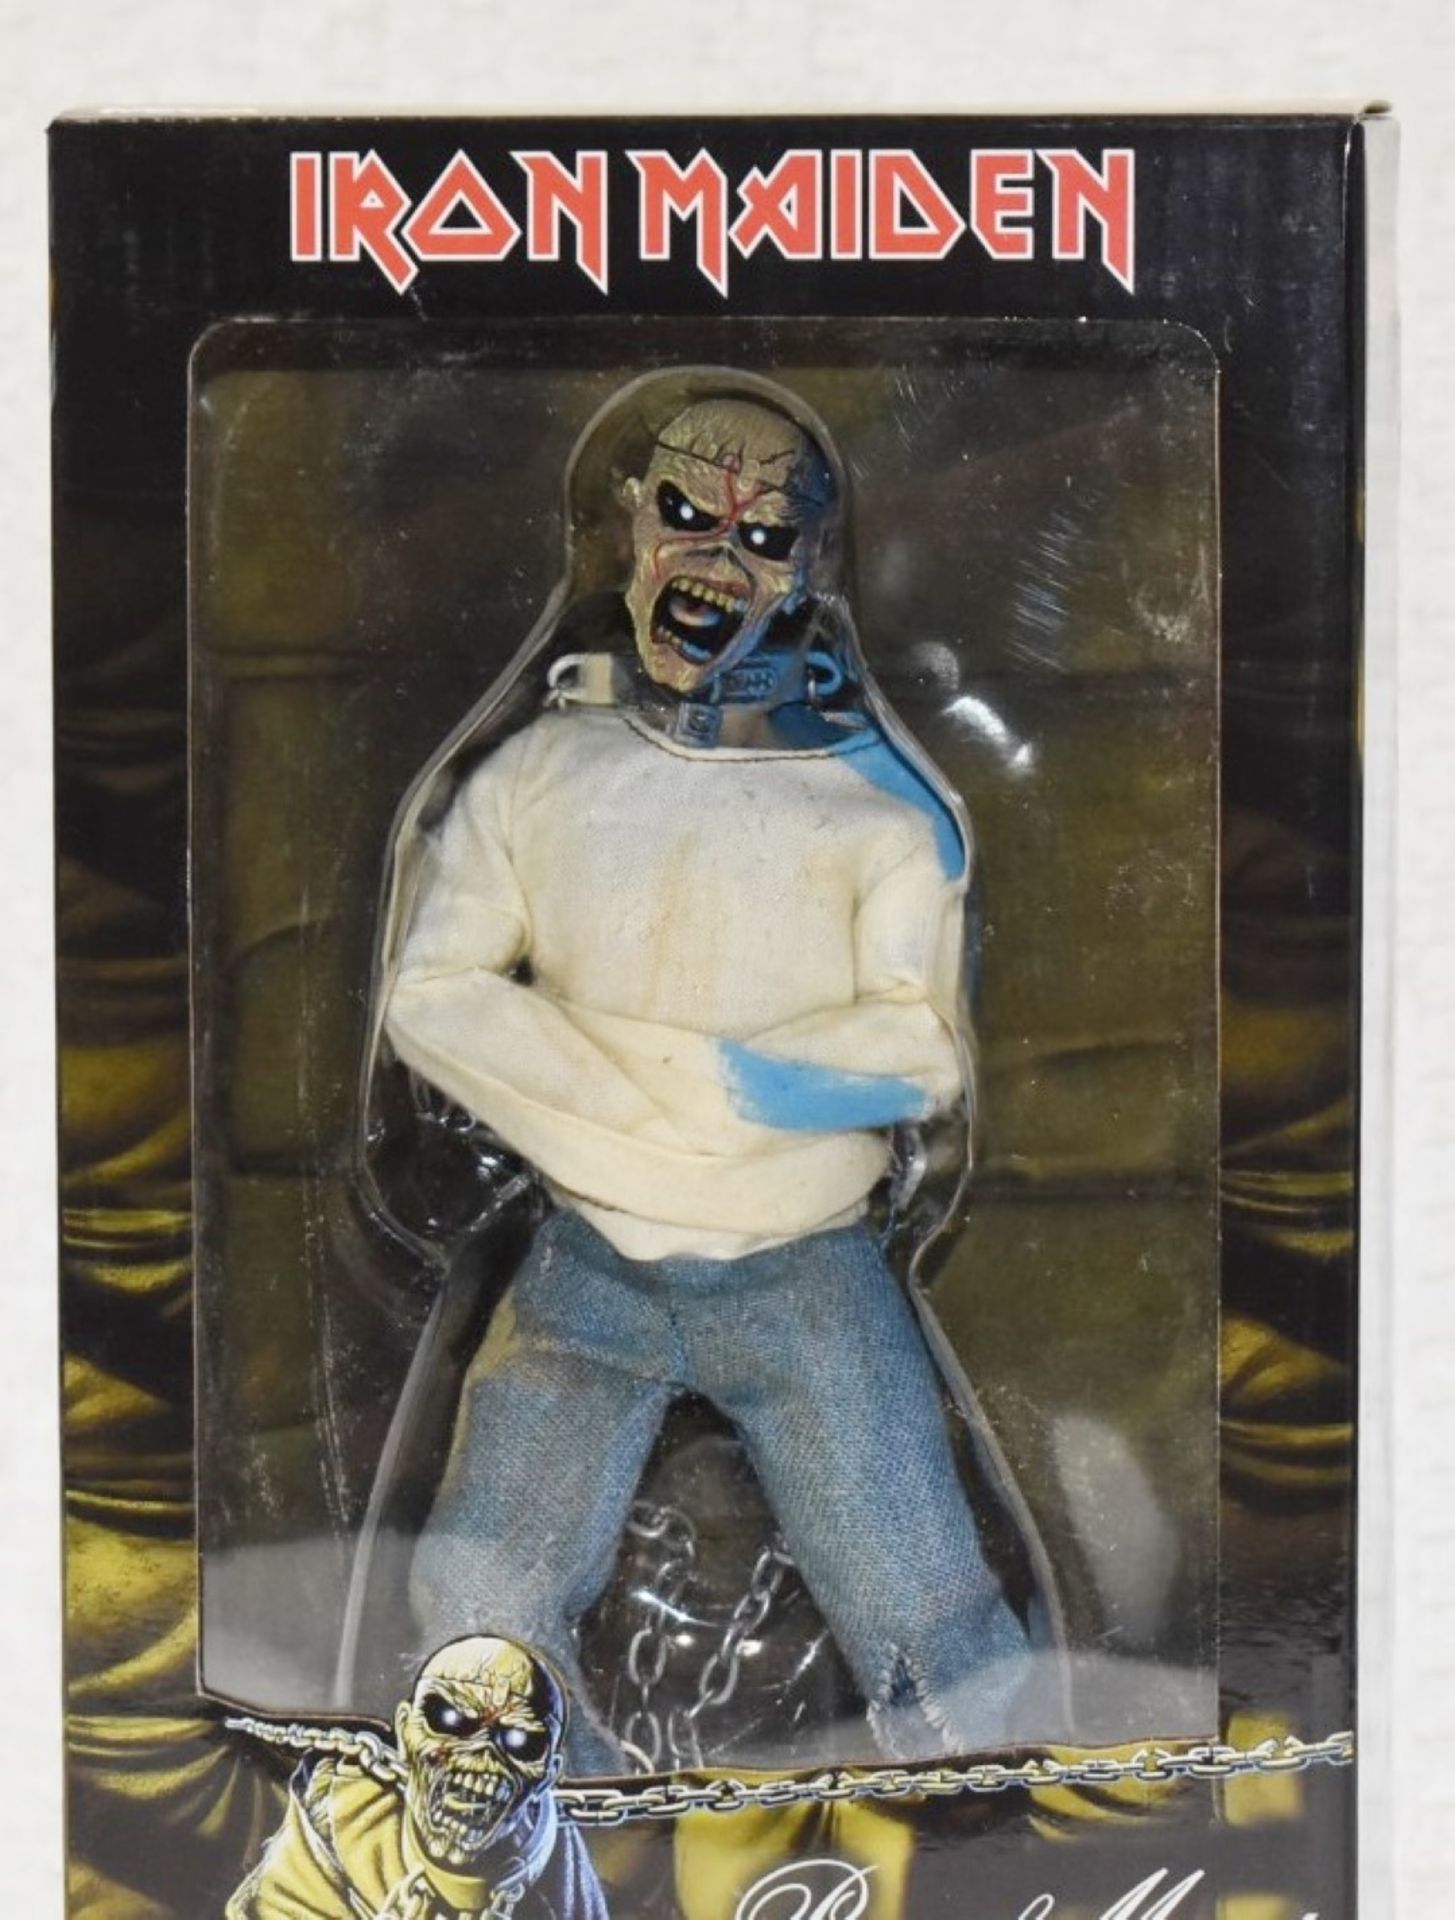 1 x Iron Maiden Piece of Mind Eddie Clothed 7 Inch Action Figure By Neca - New & Unused - RRP £60 - Image 3 of 9